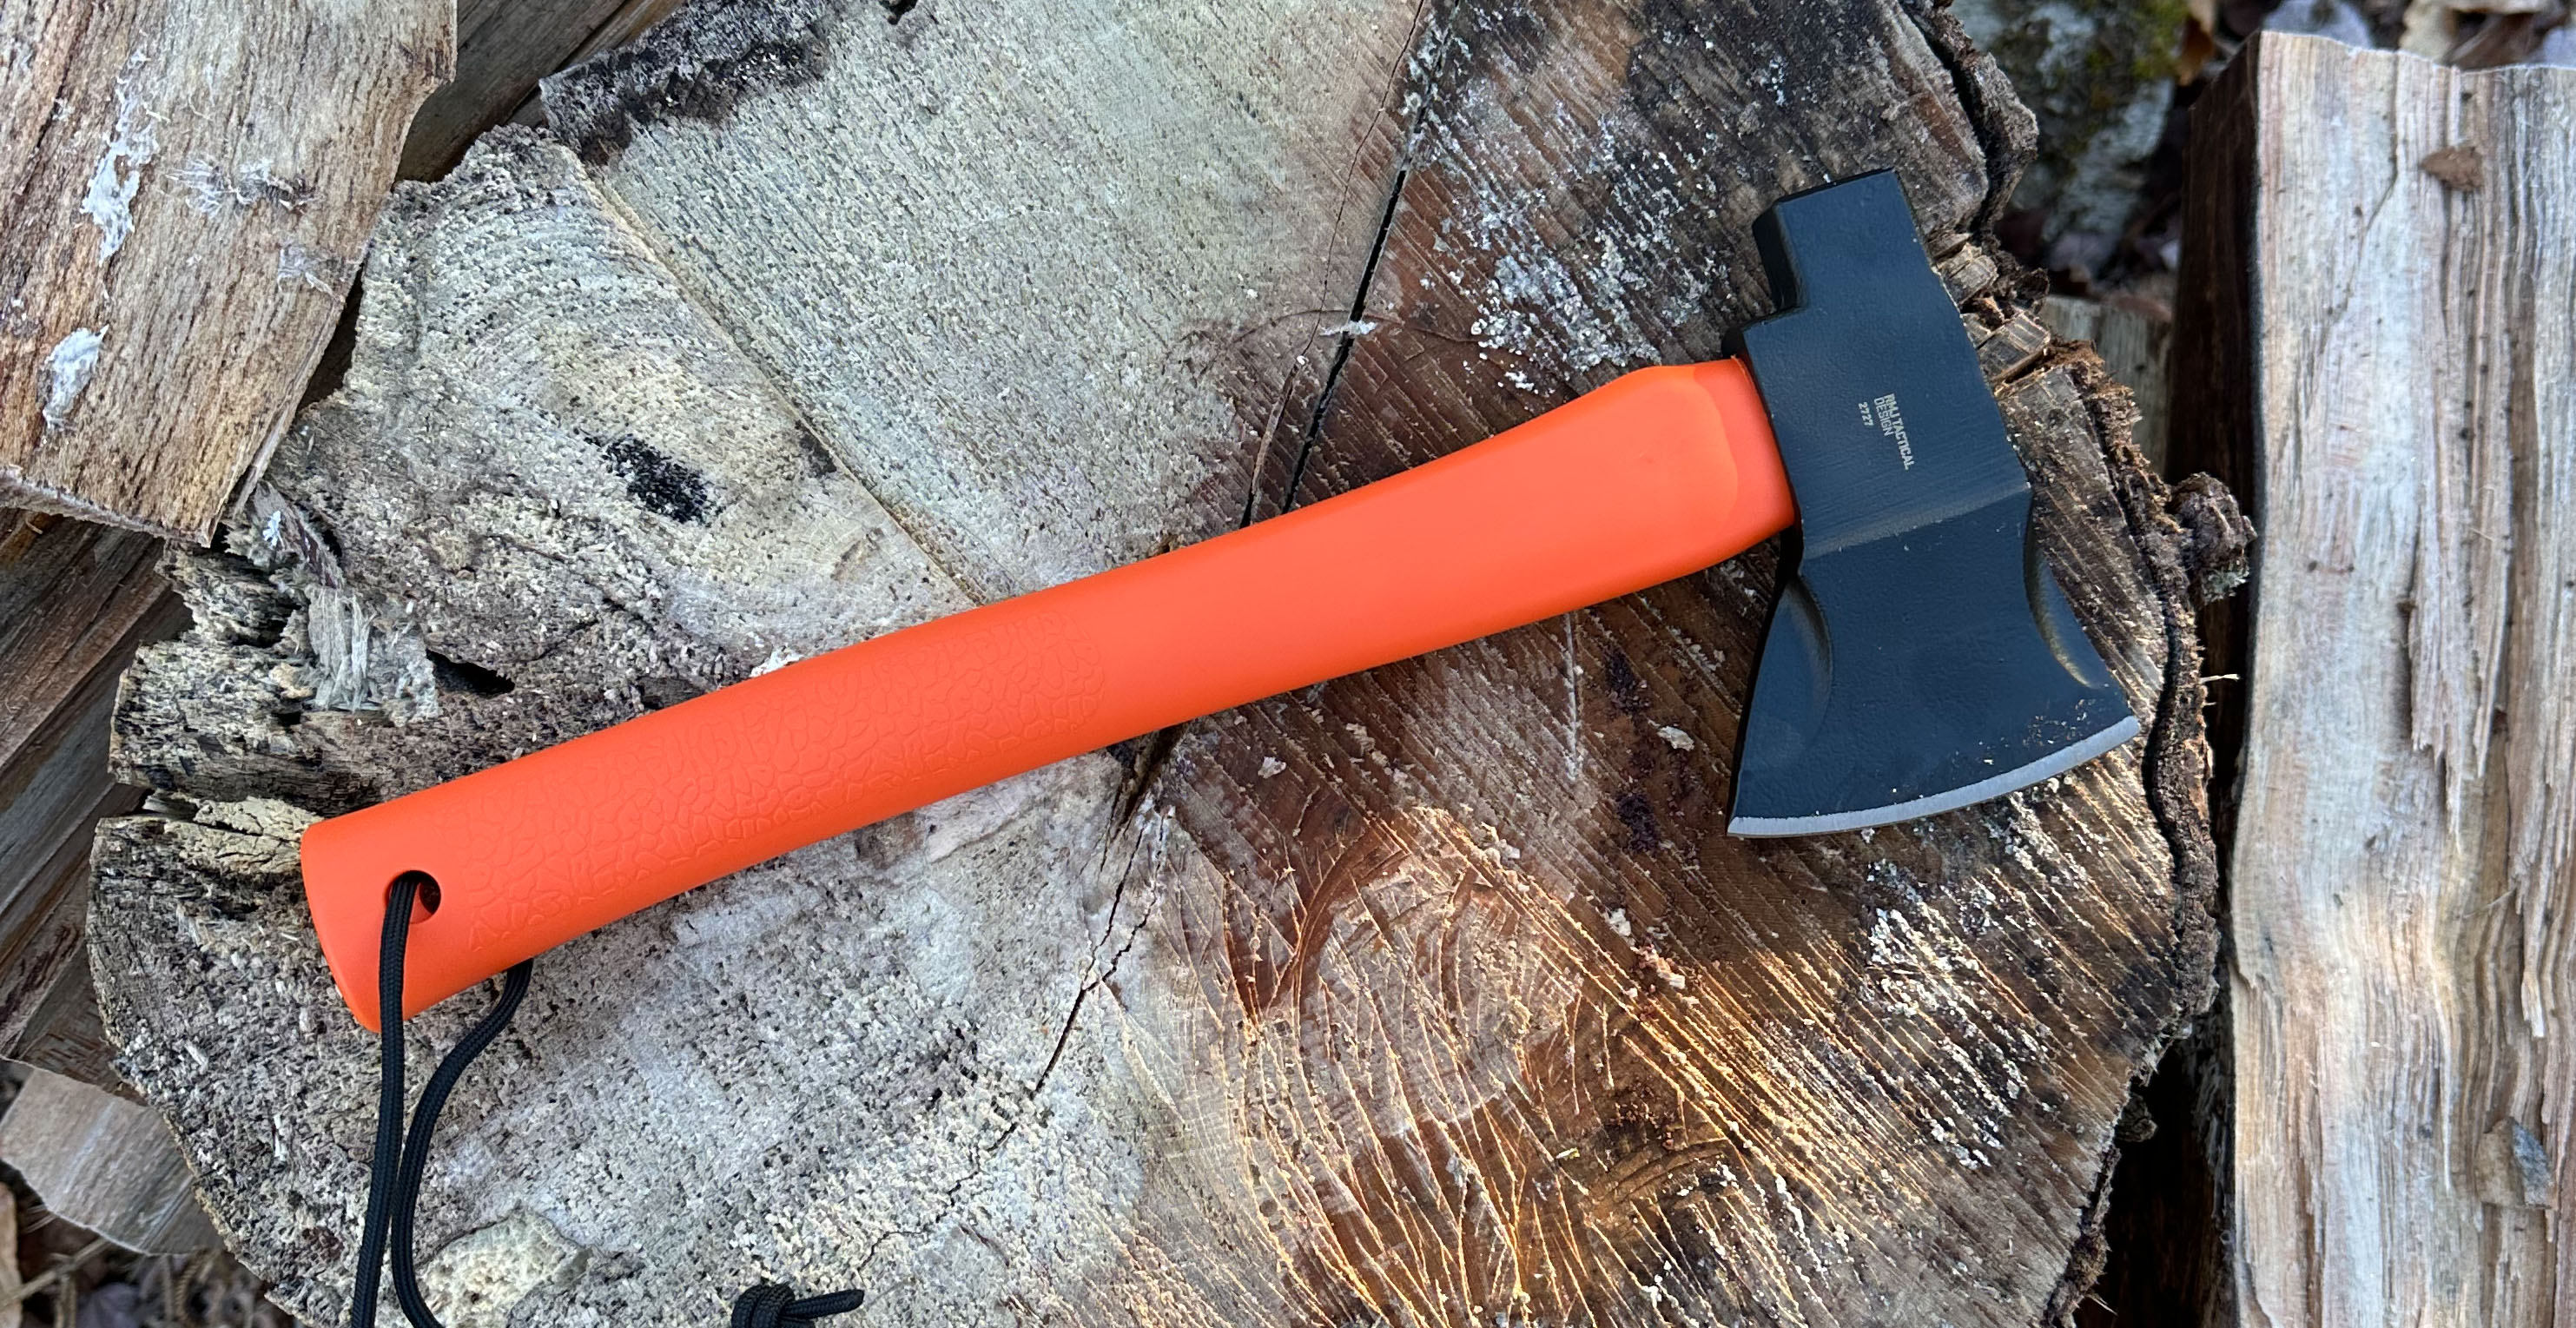 Small but Mighty, This Tomahawk Can Hack It: CRKT Chogan Hatchet Review